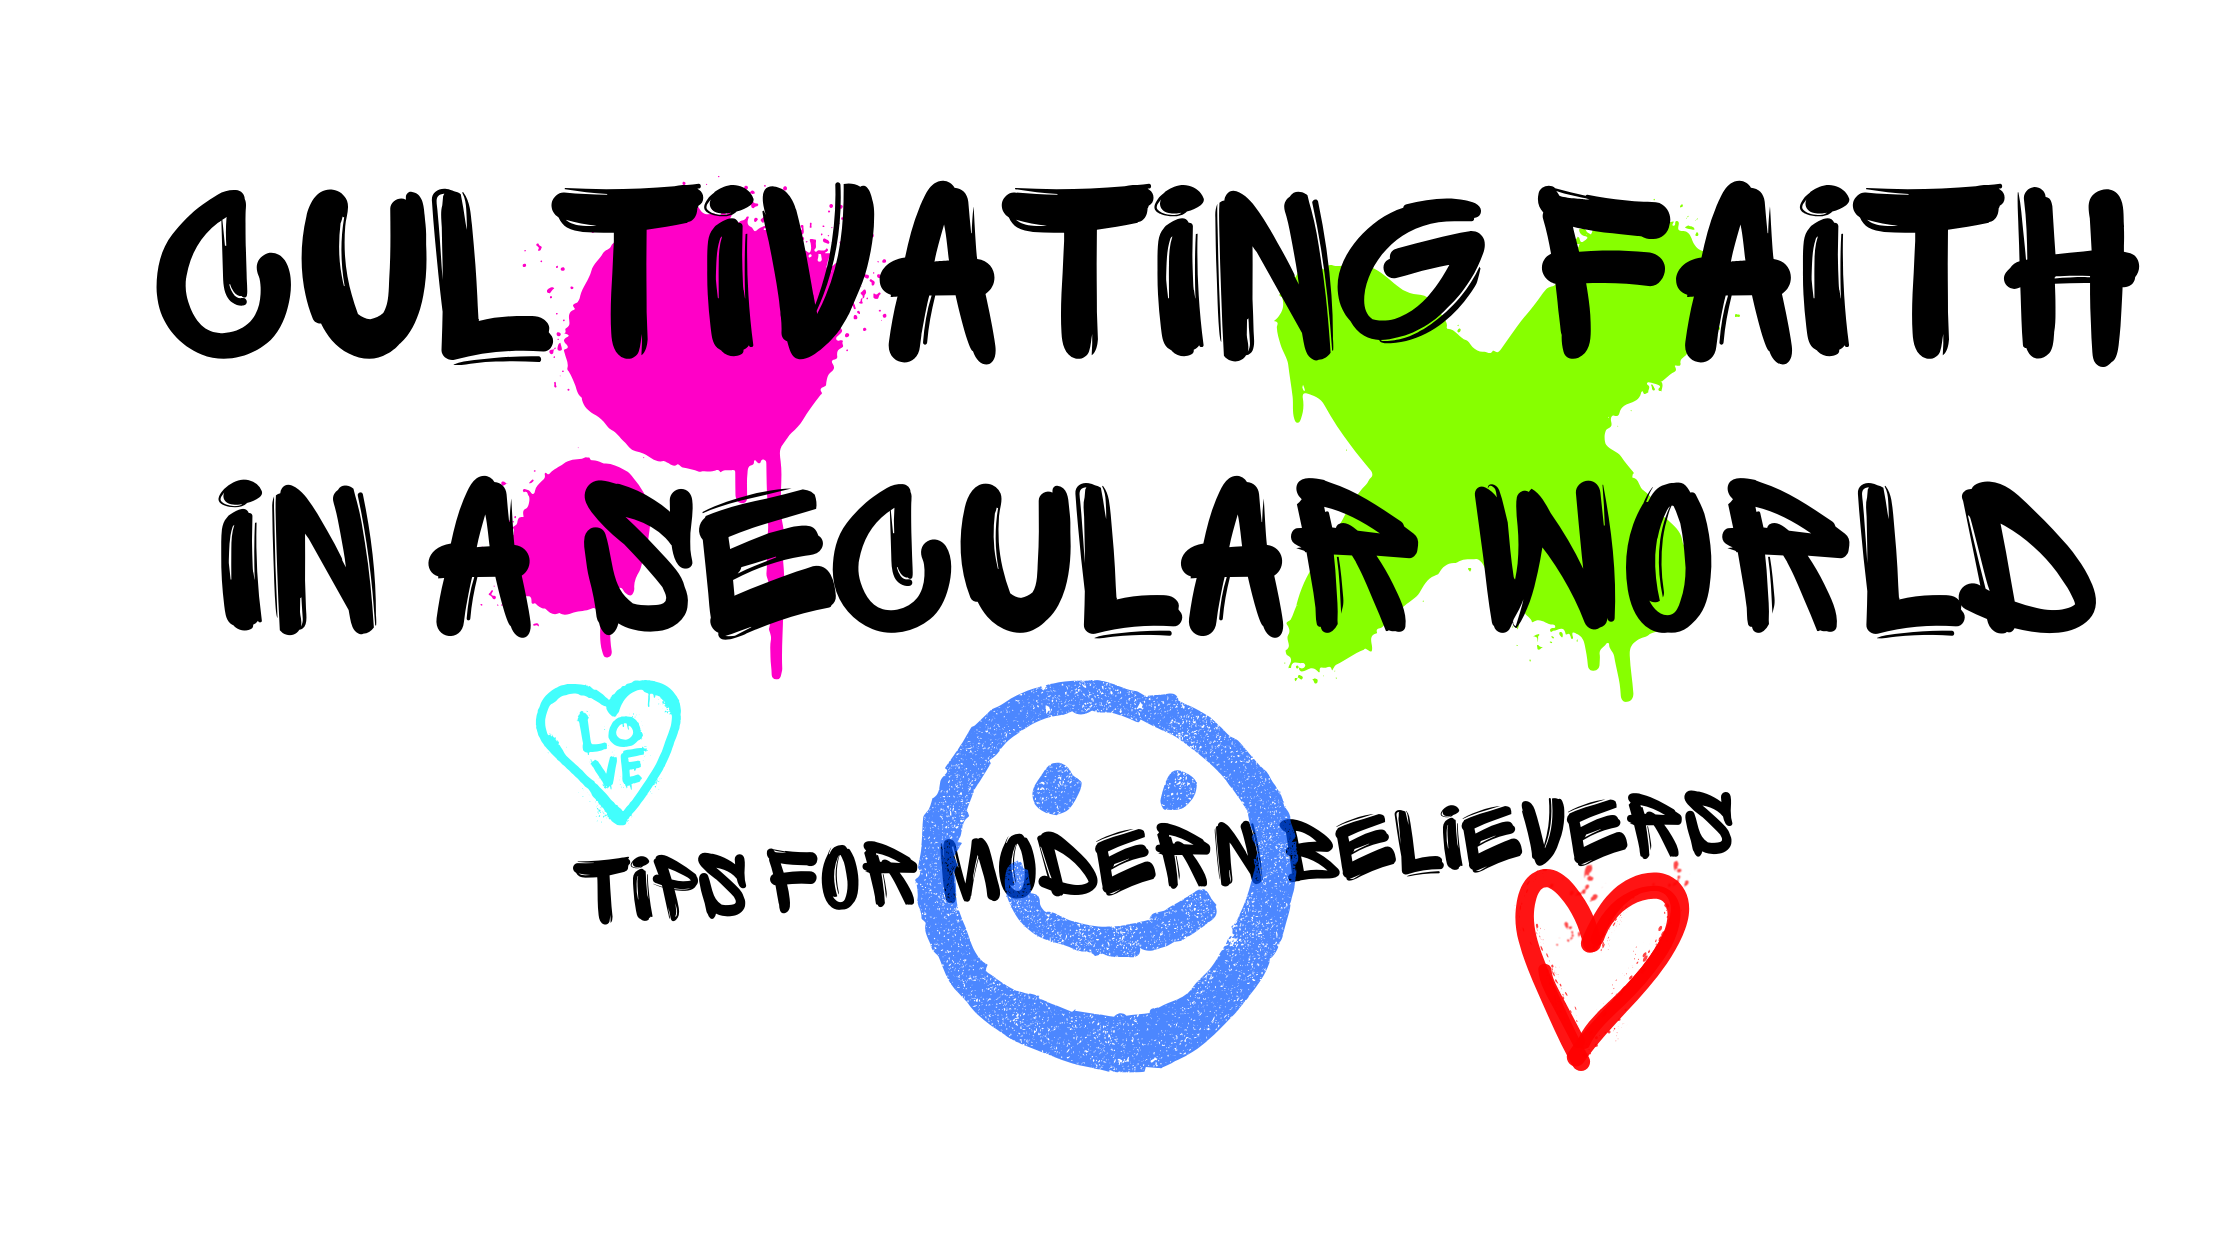 Cultivating Faith in a Secular World: Tips for Modern Believers, with Jesus as Our Guide